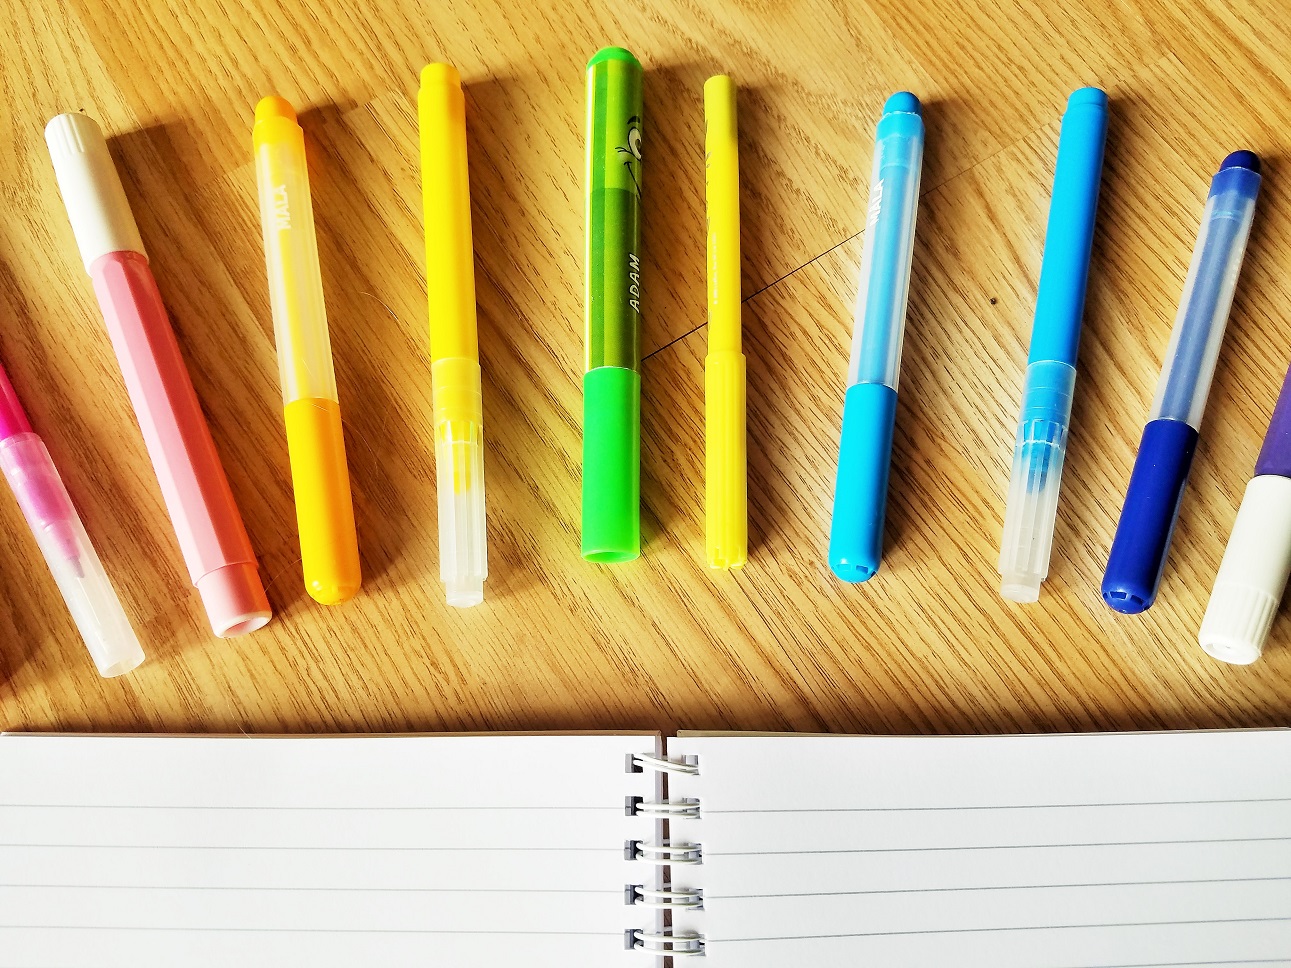 Spelling Test - colourful rainbow pens arranged around a school notebook